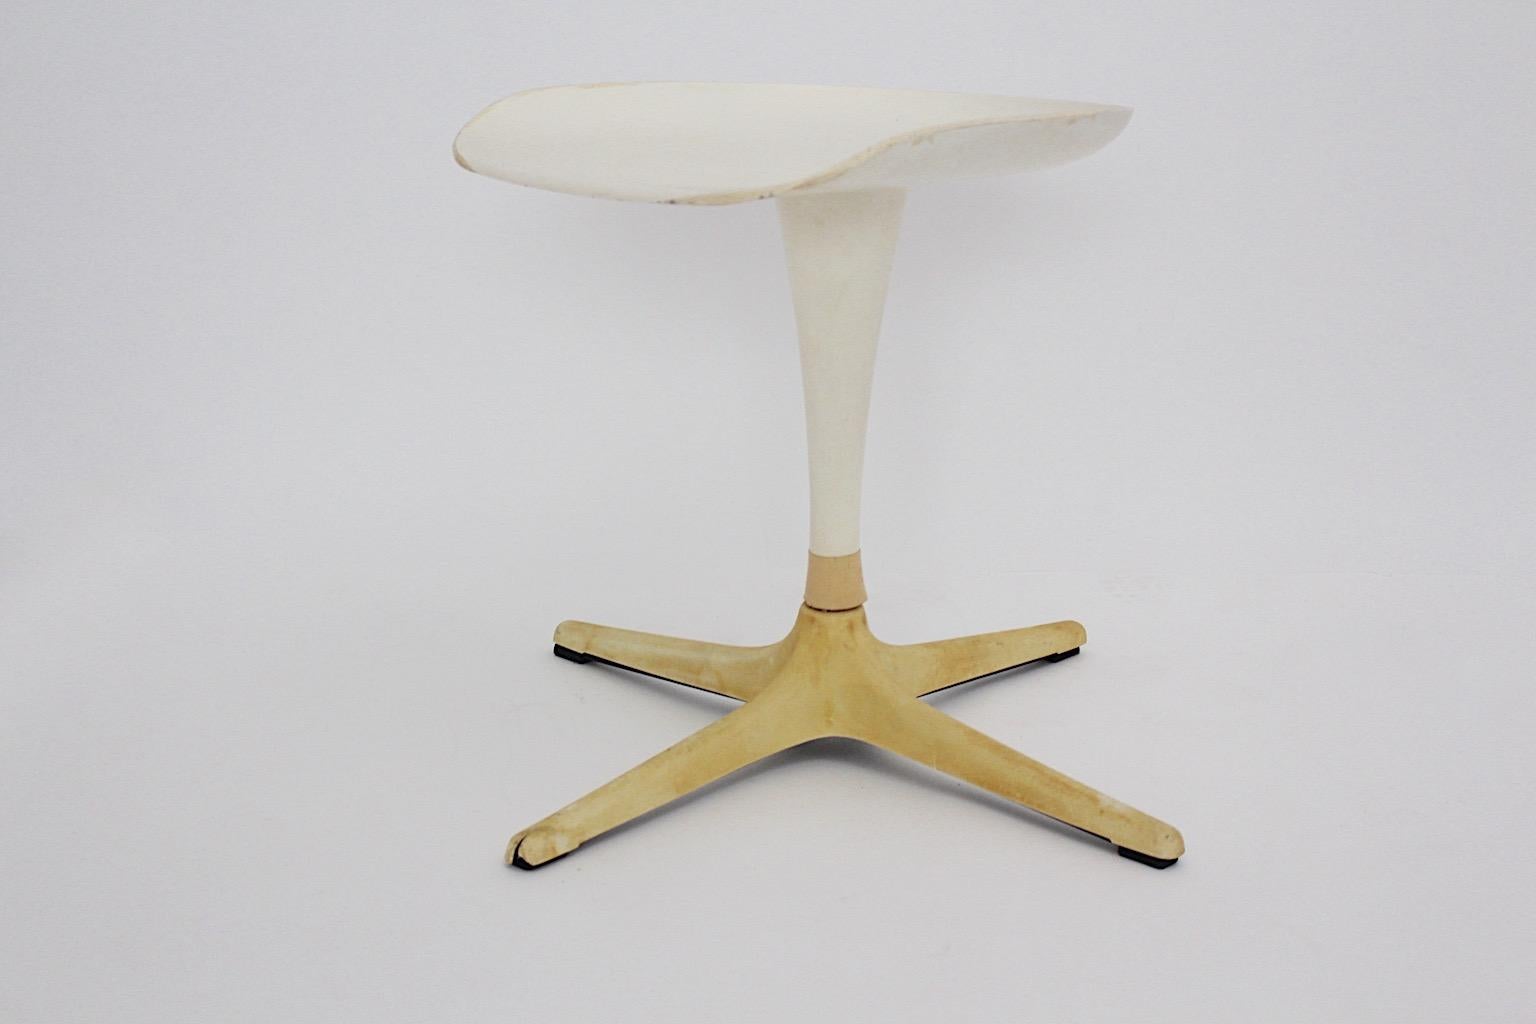 Space Age vintage organic stool from plastic in white and ivory color designed by Luigi Colani. Germany 1971 / 1972.
A rare collector piece, this new arrival, a stool from white and ivory plastic by Luigi Colani 1971 / 72.
Luigi Colani ( 1928 - 2019